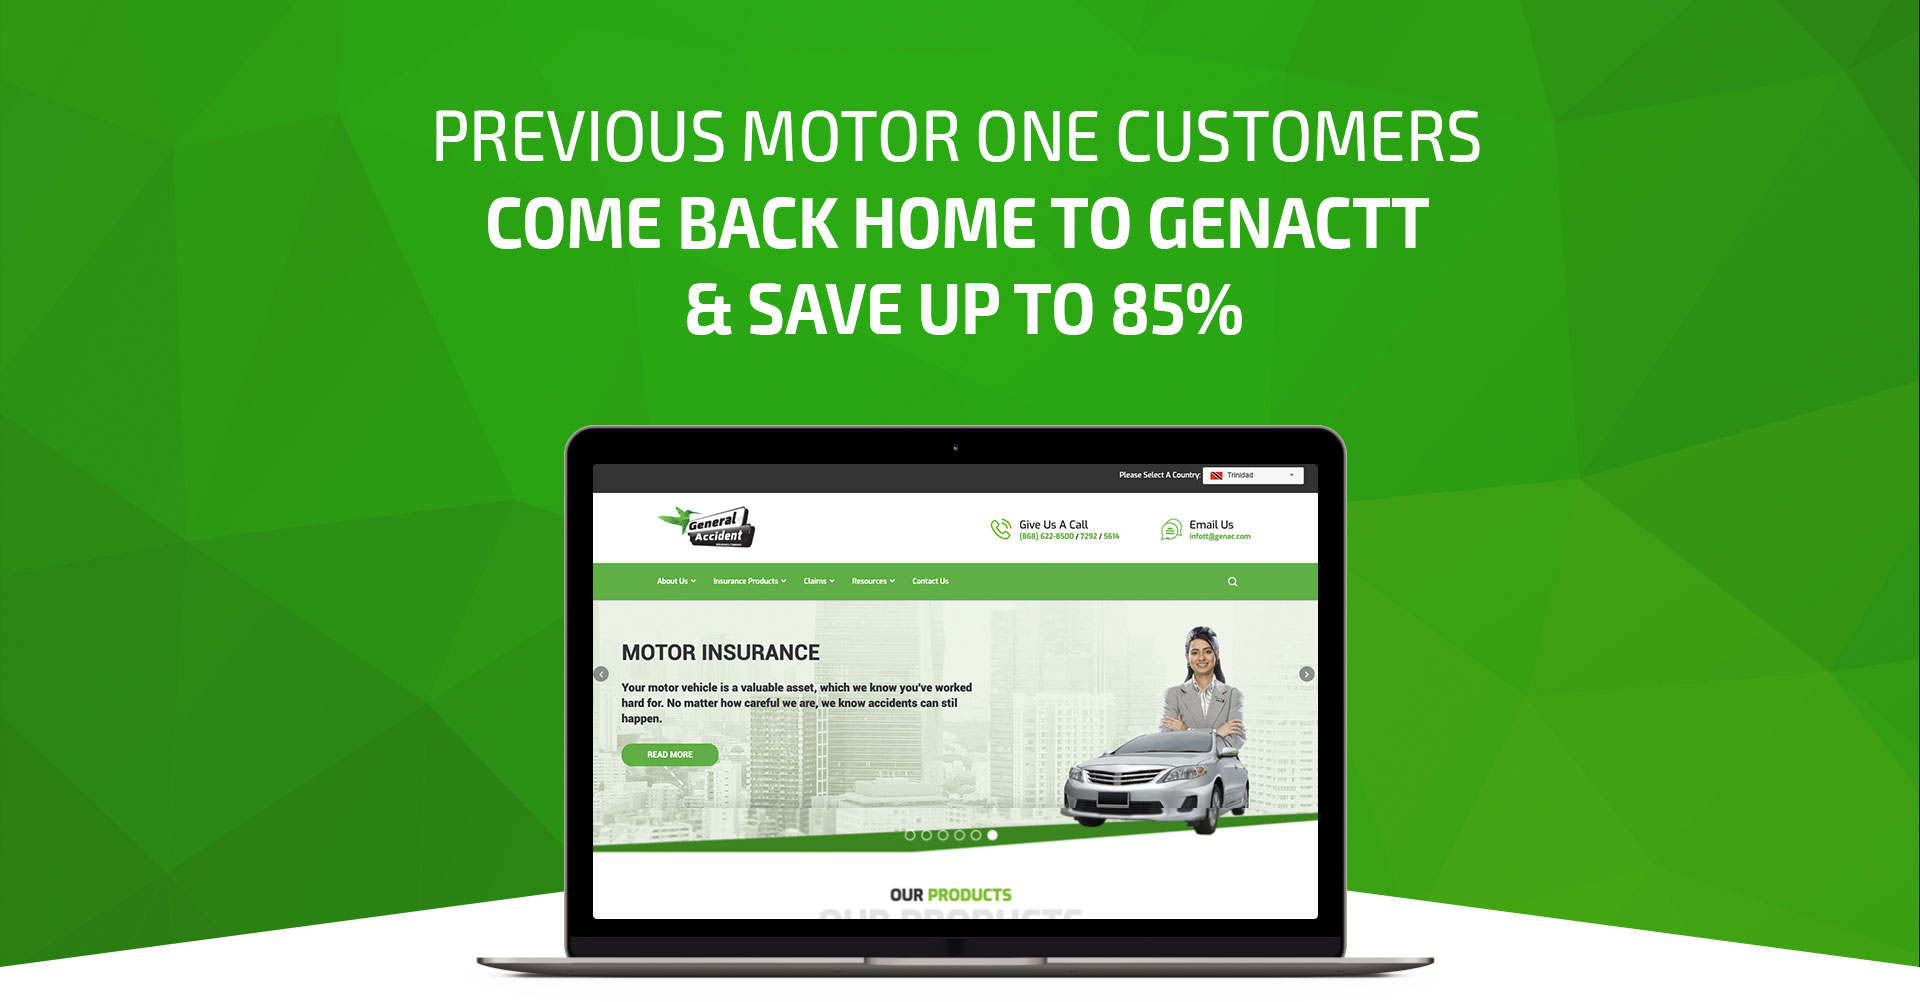 Previous motor one customers come back home to GenacTT